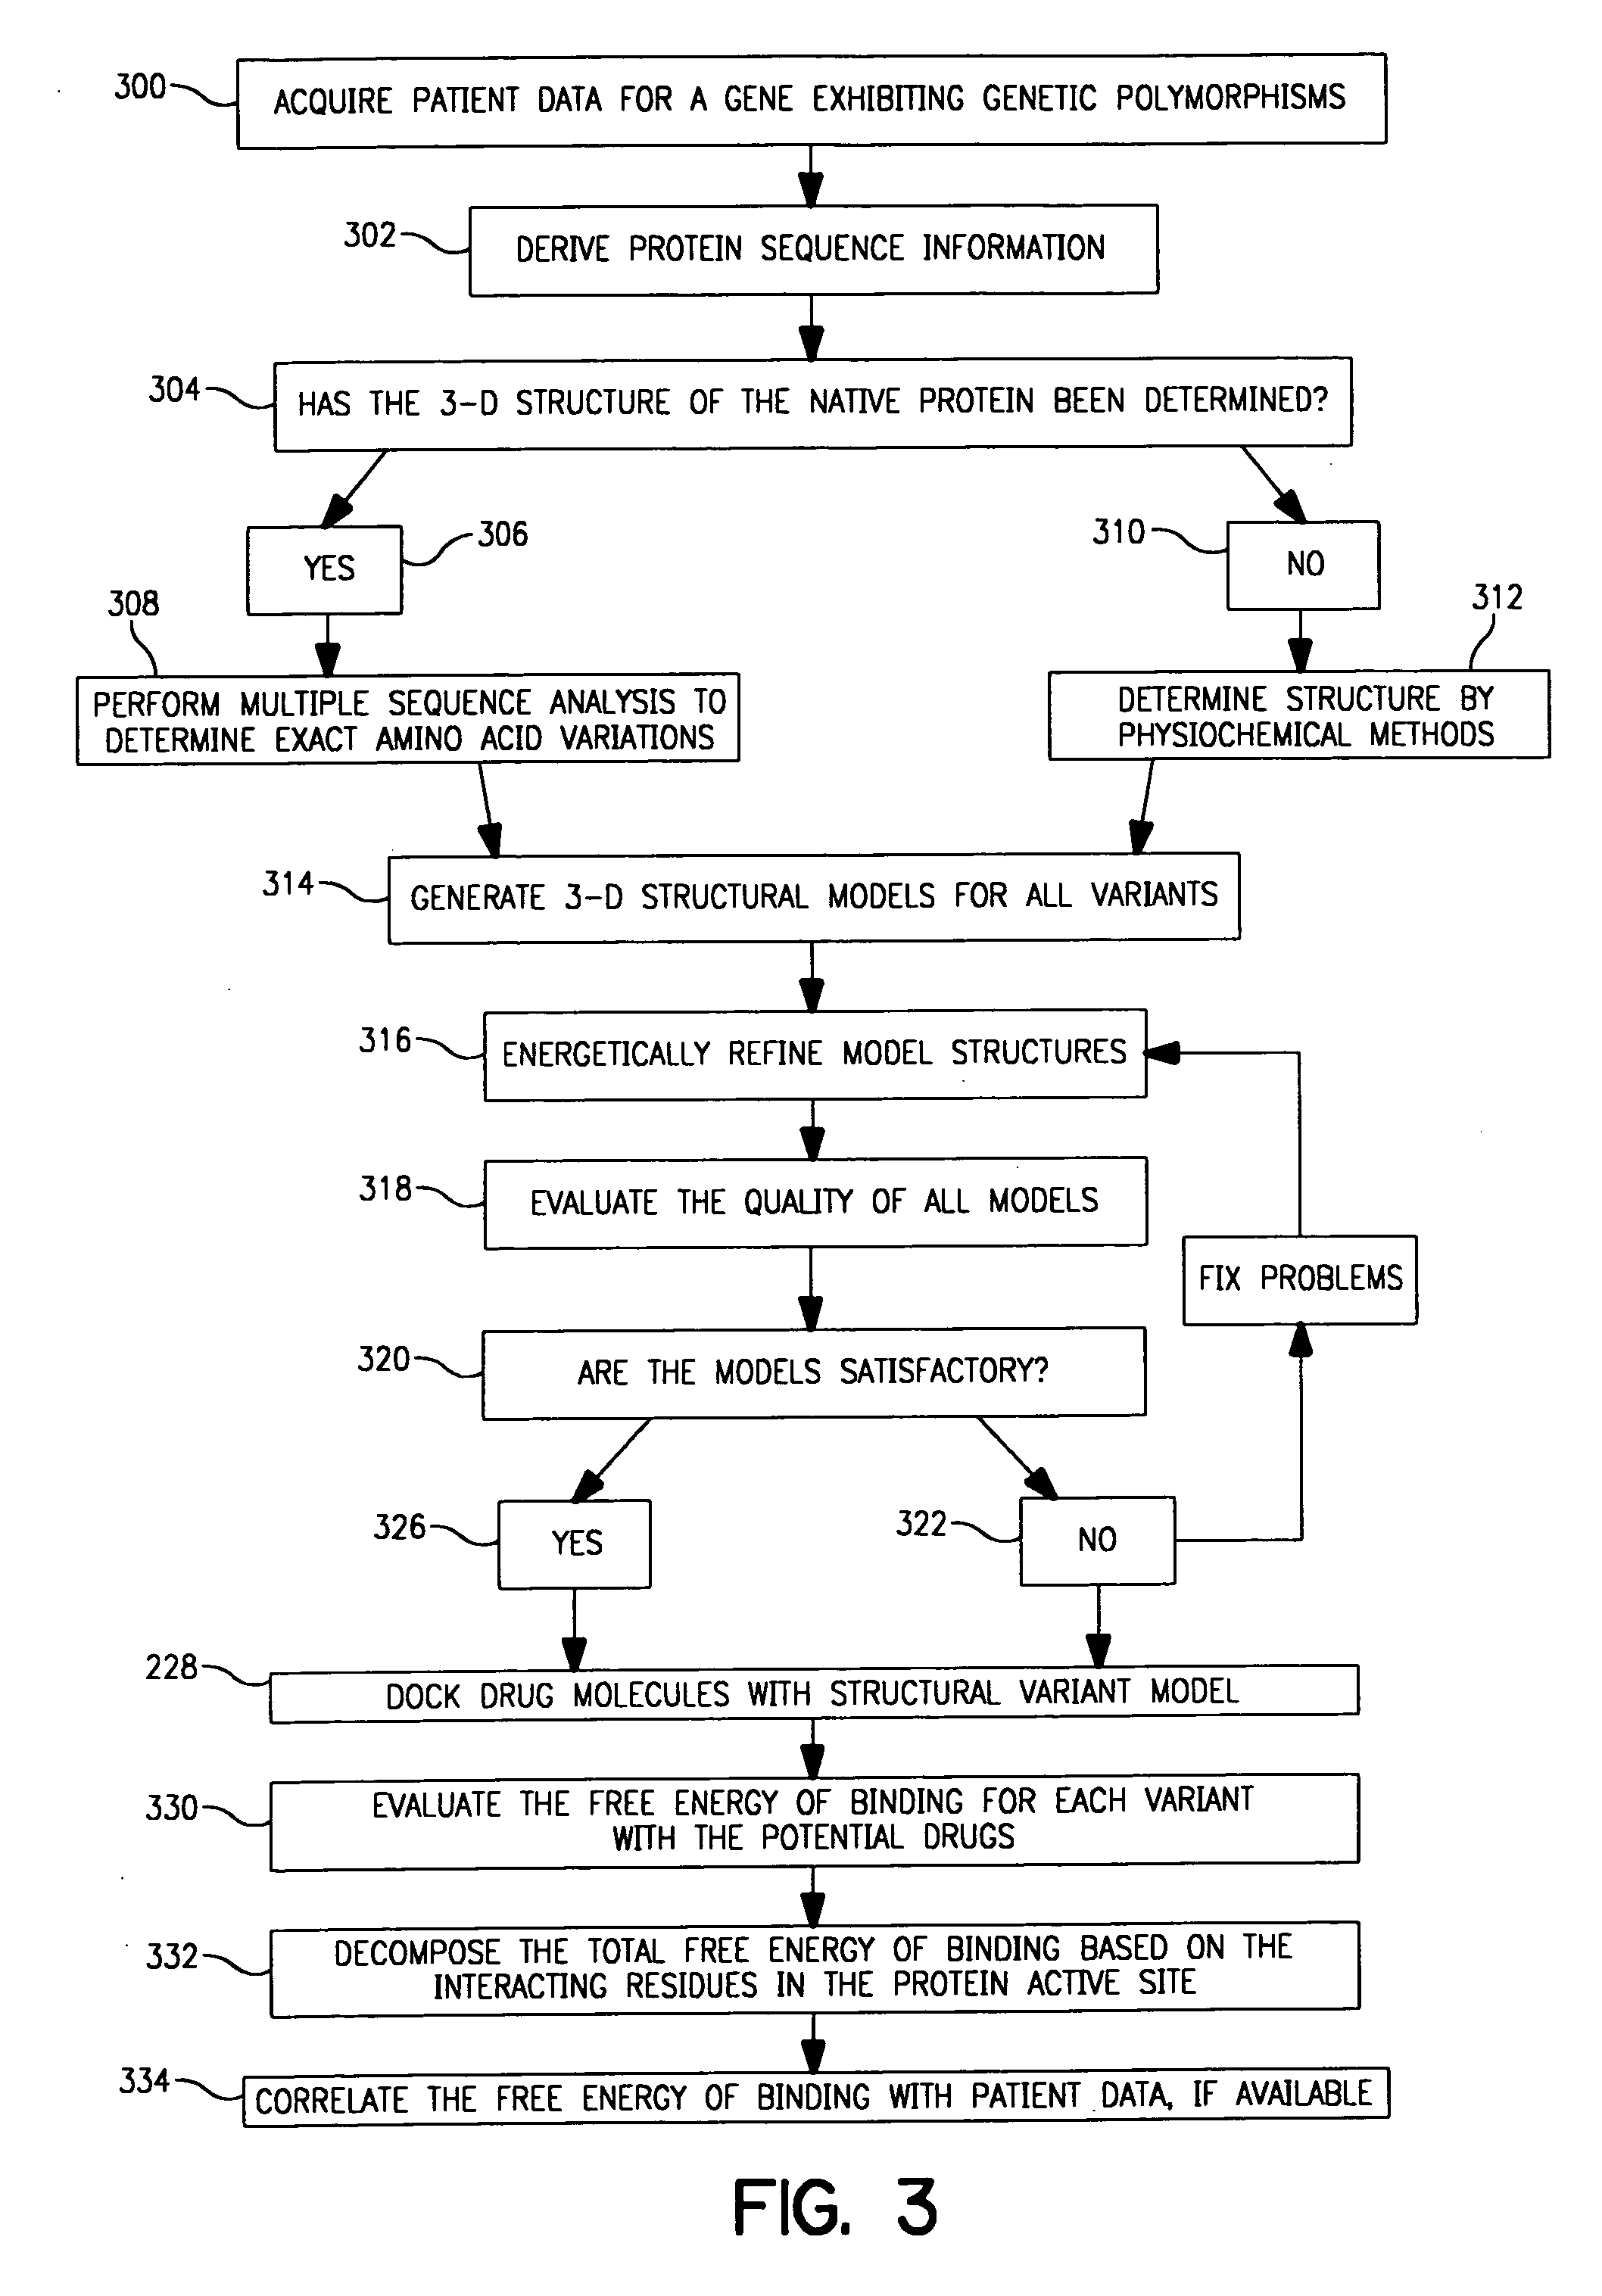 Use of computationally derived protein structures of genetic polymorphisms in pharmacogenomics and clinical applications